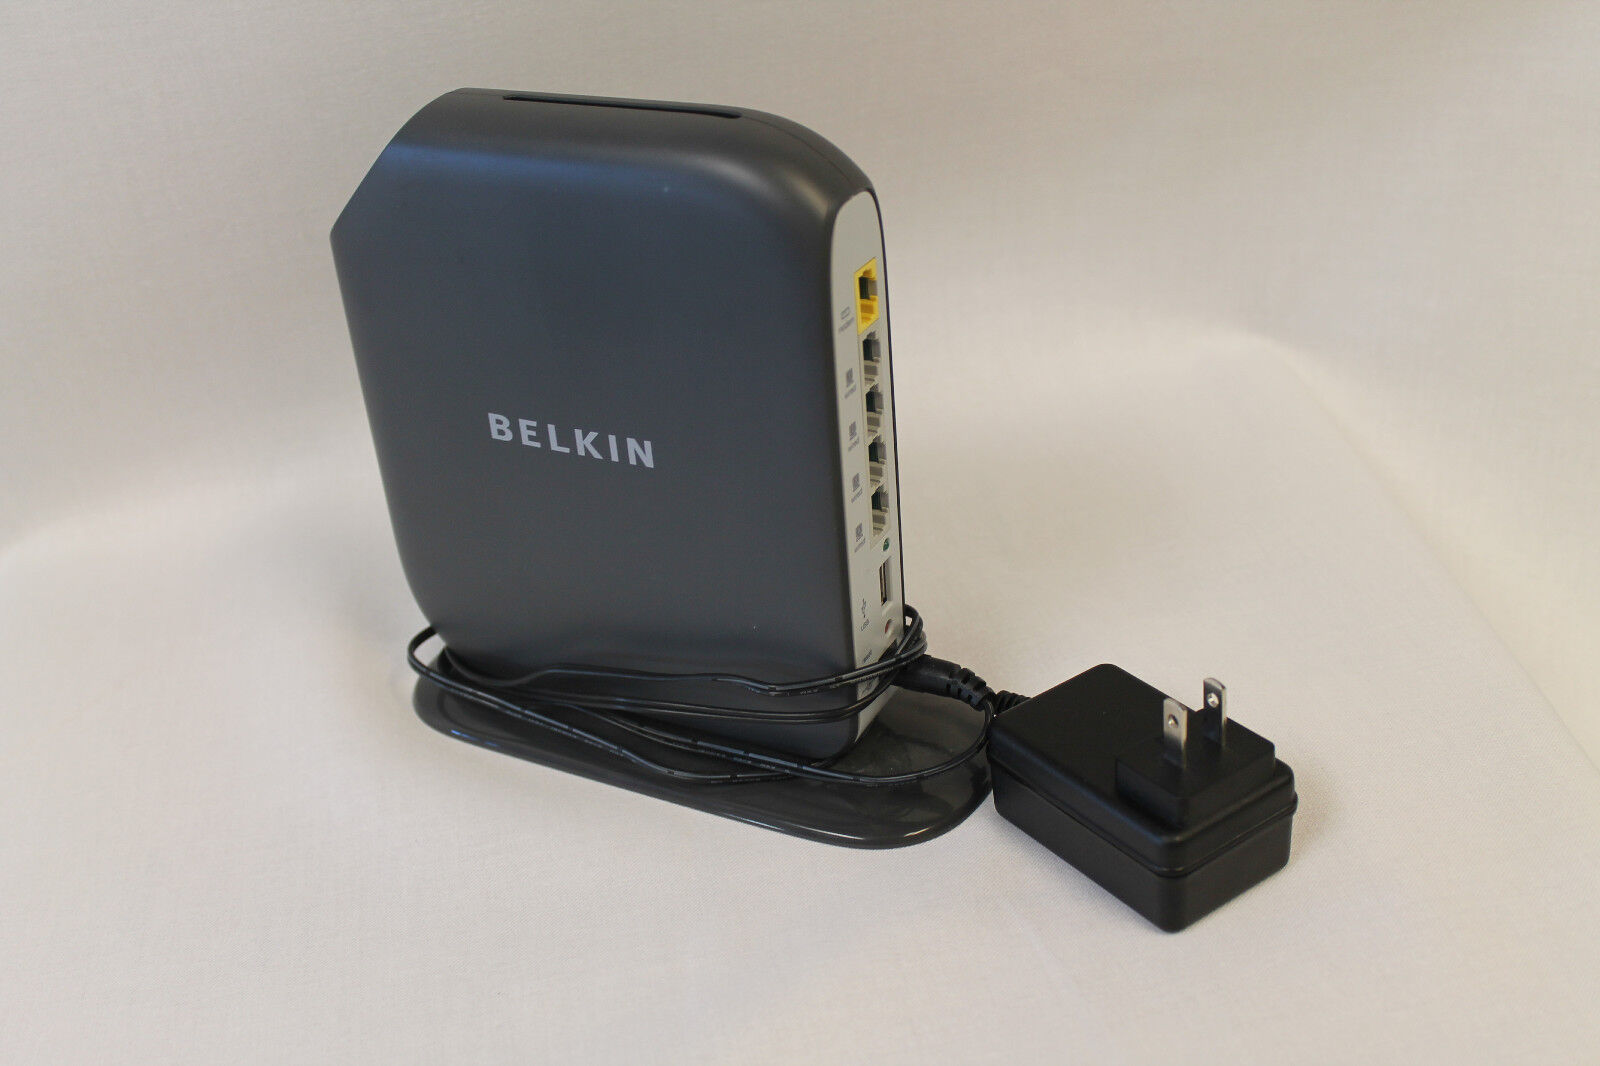 Belkin F7D8302 Play N600 Wireless Dual Band N Router Version 1 Up To 300 Mbps